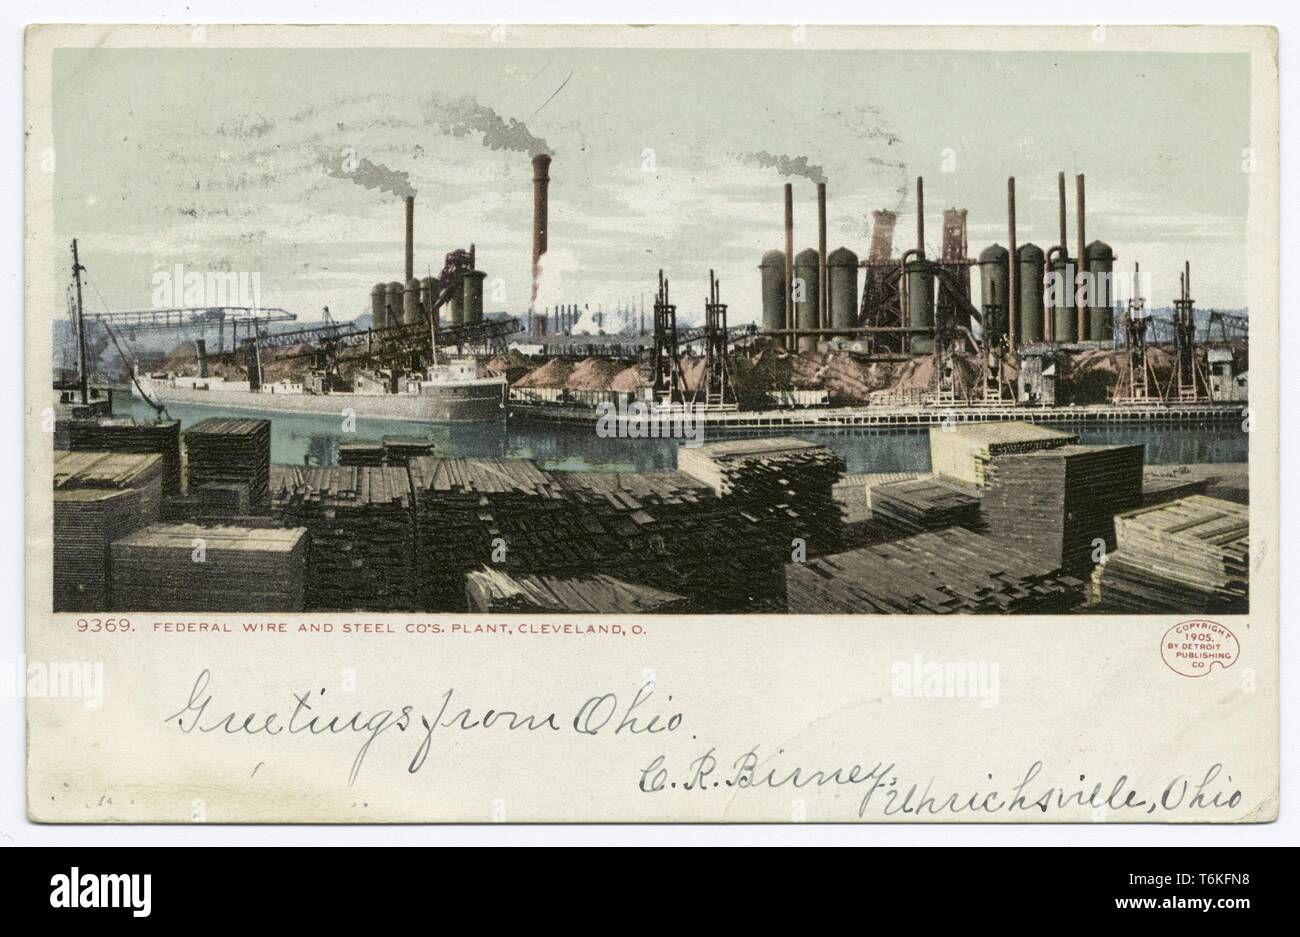 Detroit Publishing Company vintage postcard depicting Federal Wire and Steel Company's plant in Cleveland, Ohio, 1914. From the New York Public Library. () Stock Photo